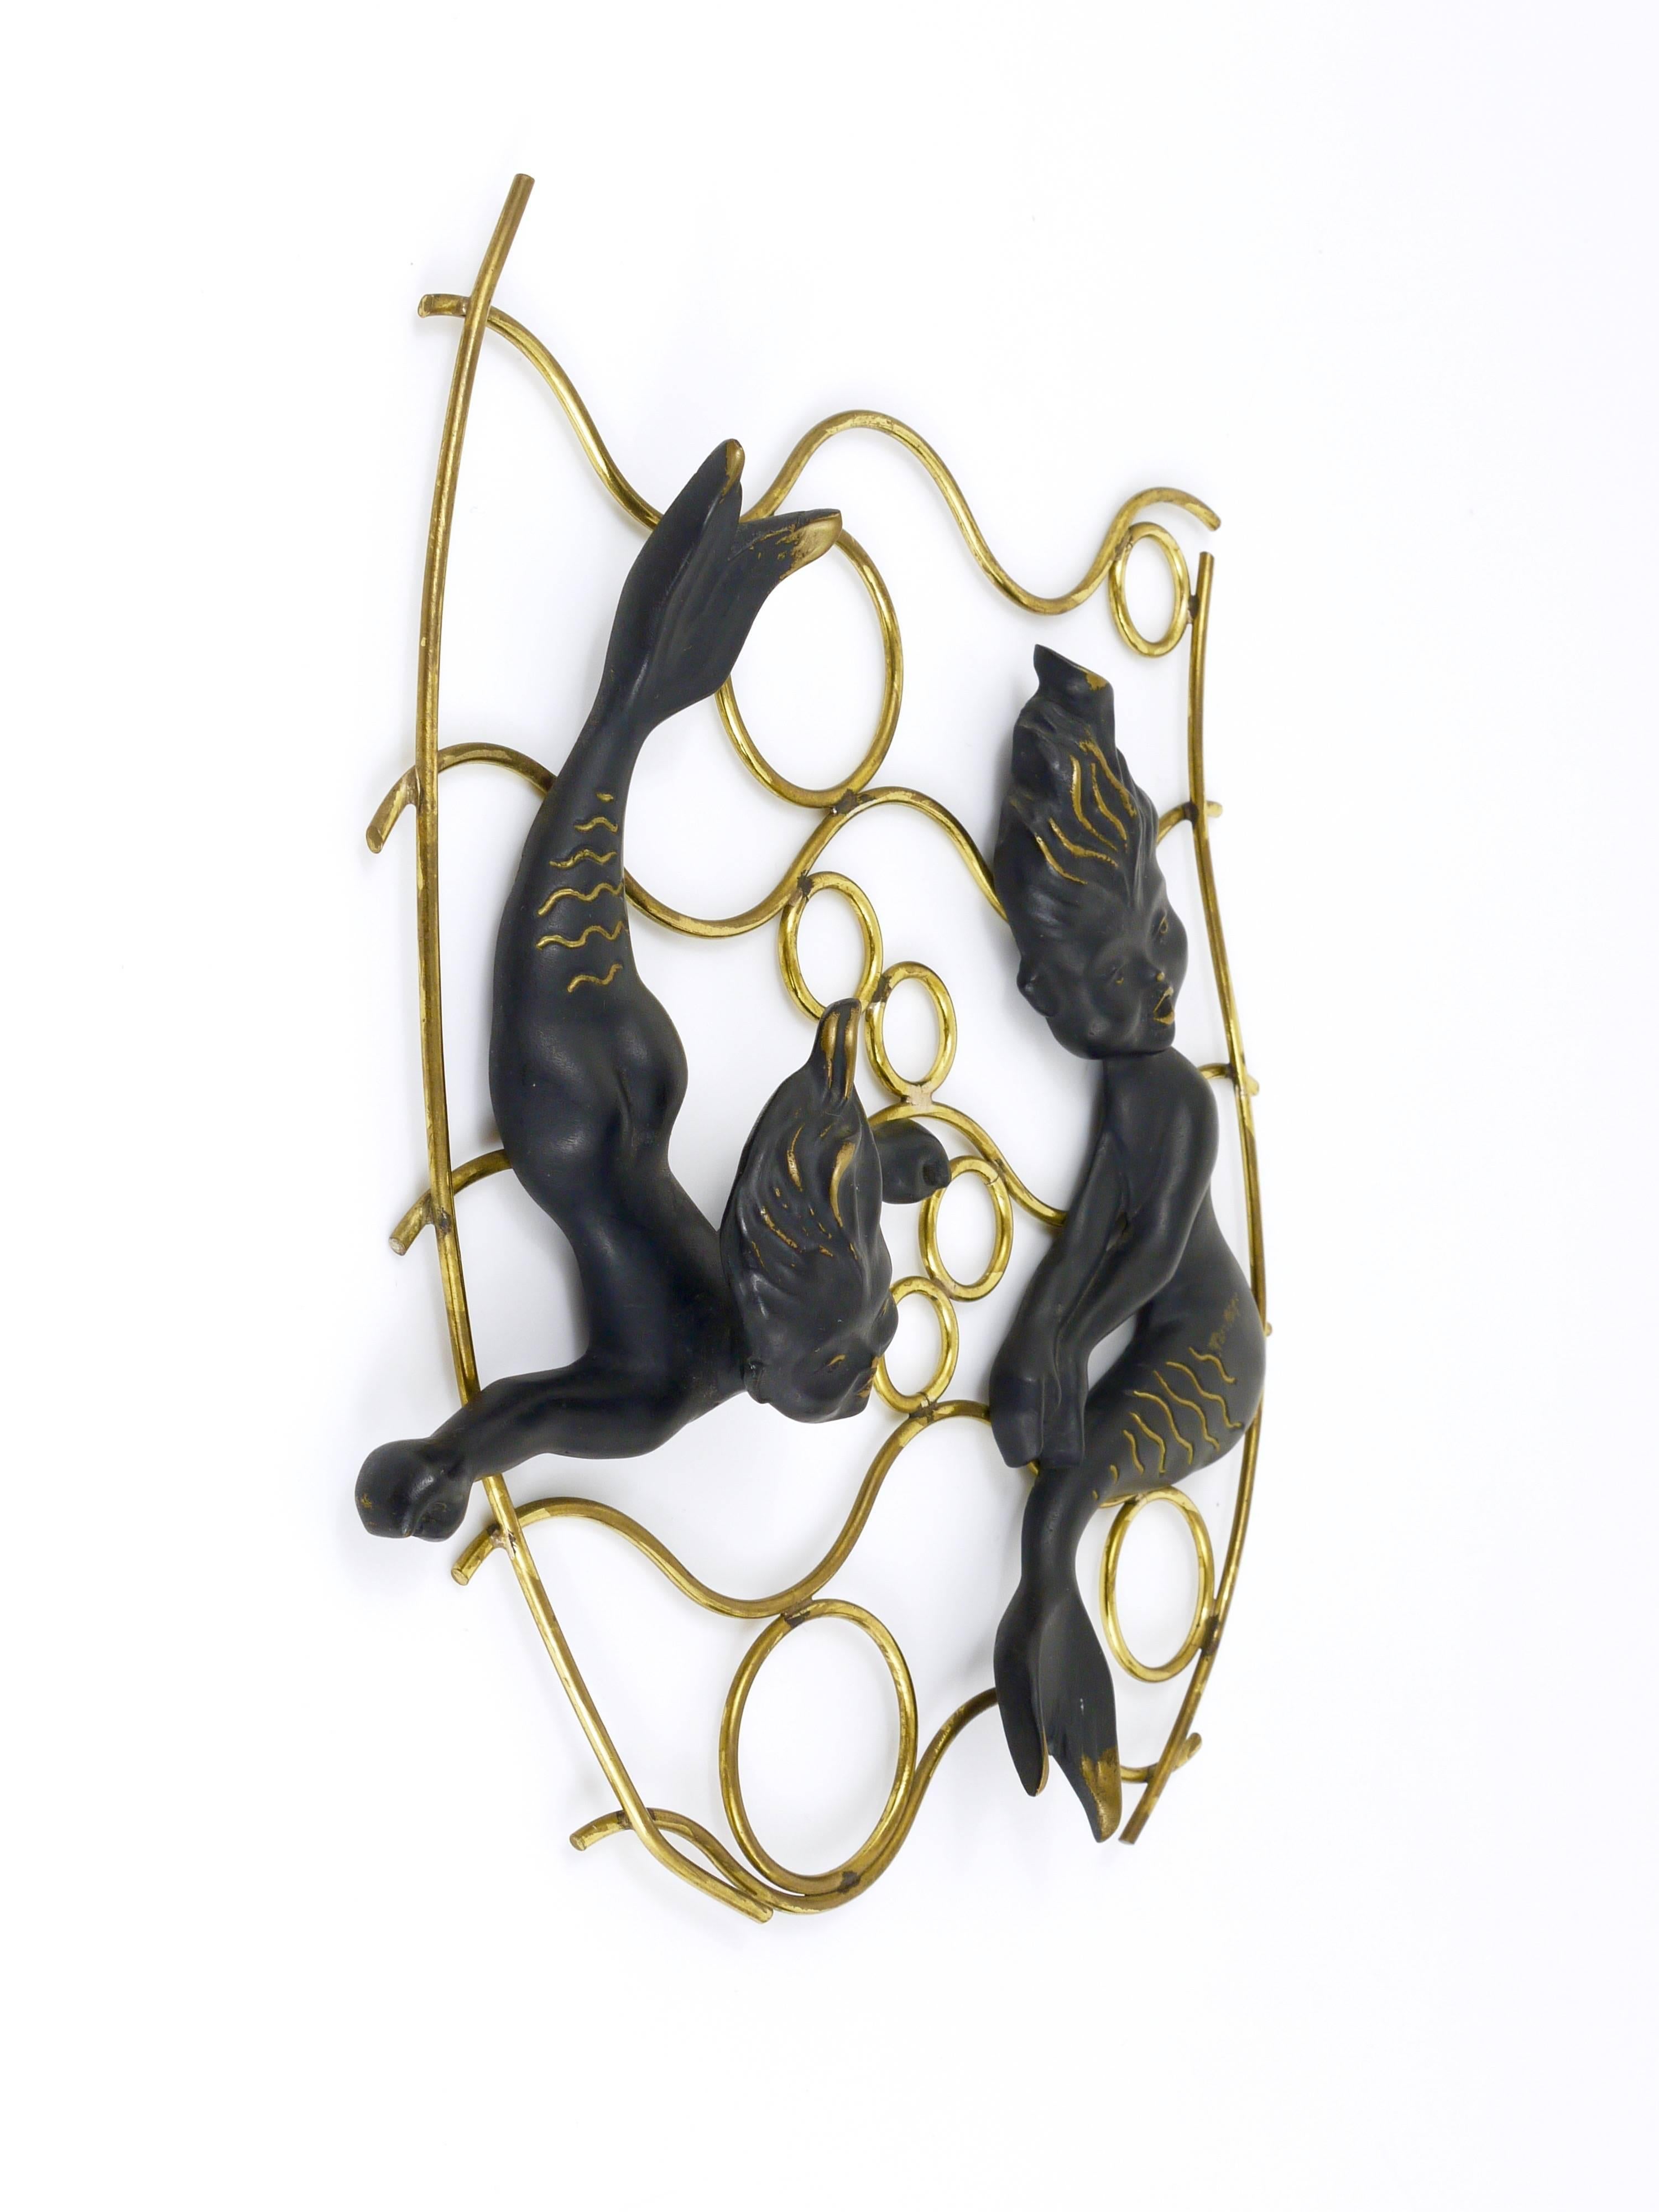 Two lovely mermaid sculptures, made of black-finished brass on a brass frame, manufactured in the 1950s by Hertha Baller, Austria. Very good condition.